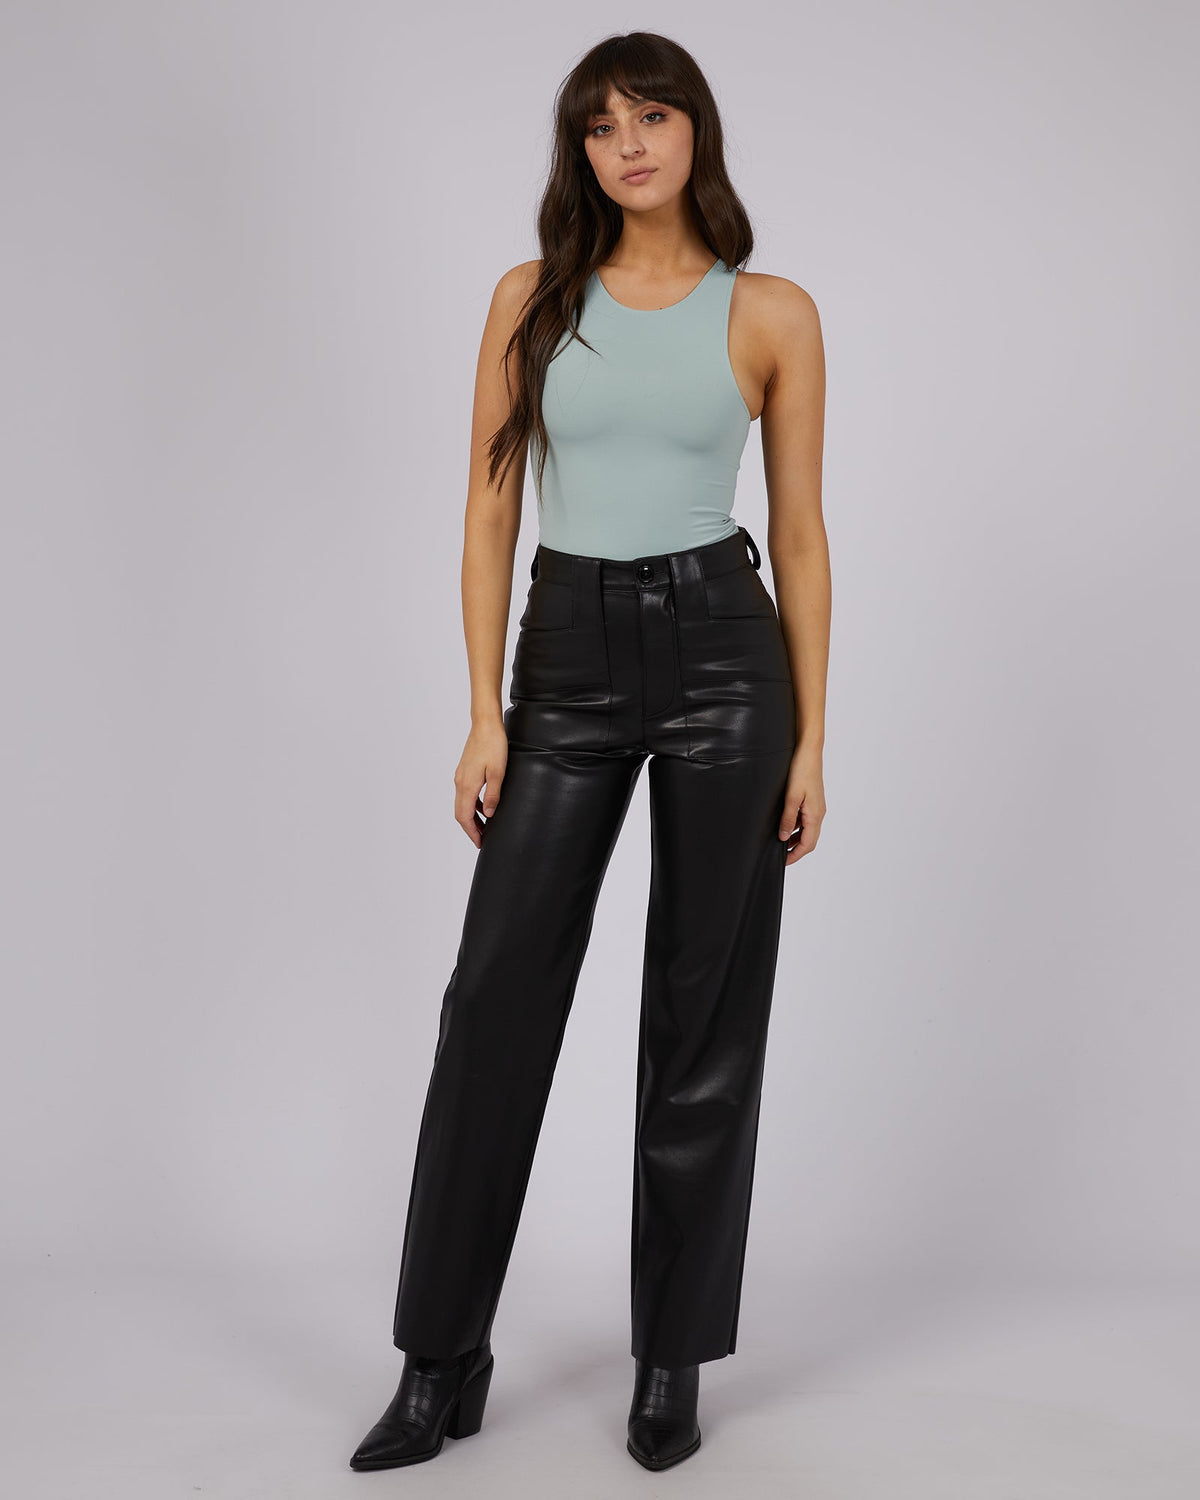 All About Eve-Eve Staple Bodysuit Sage-Edge Clothing